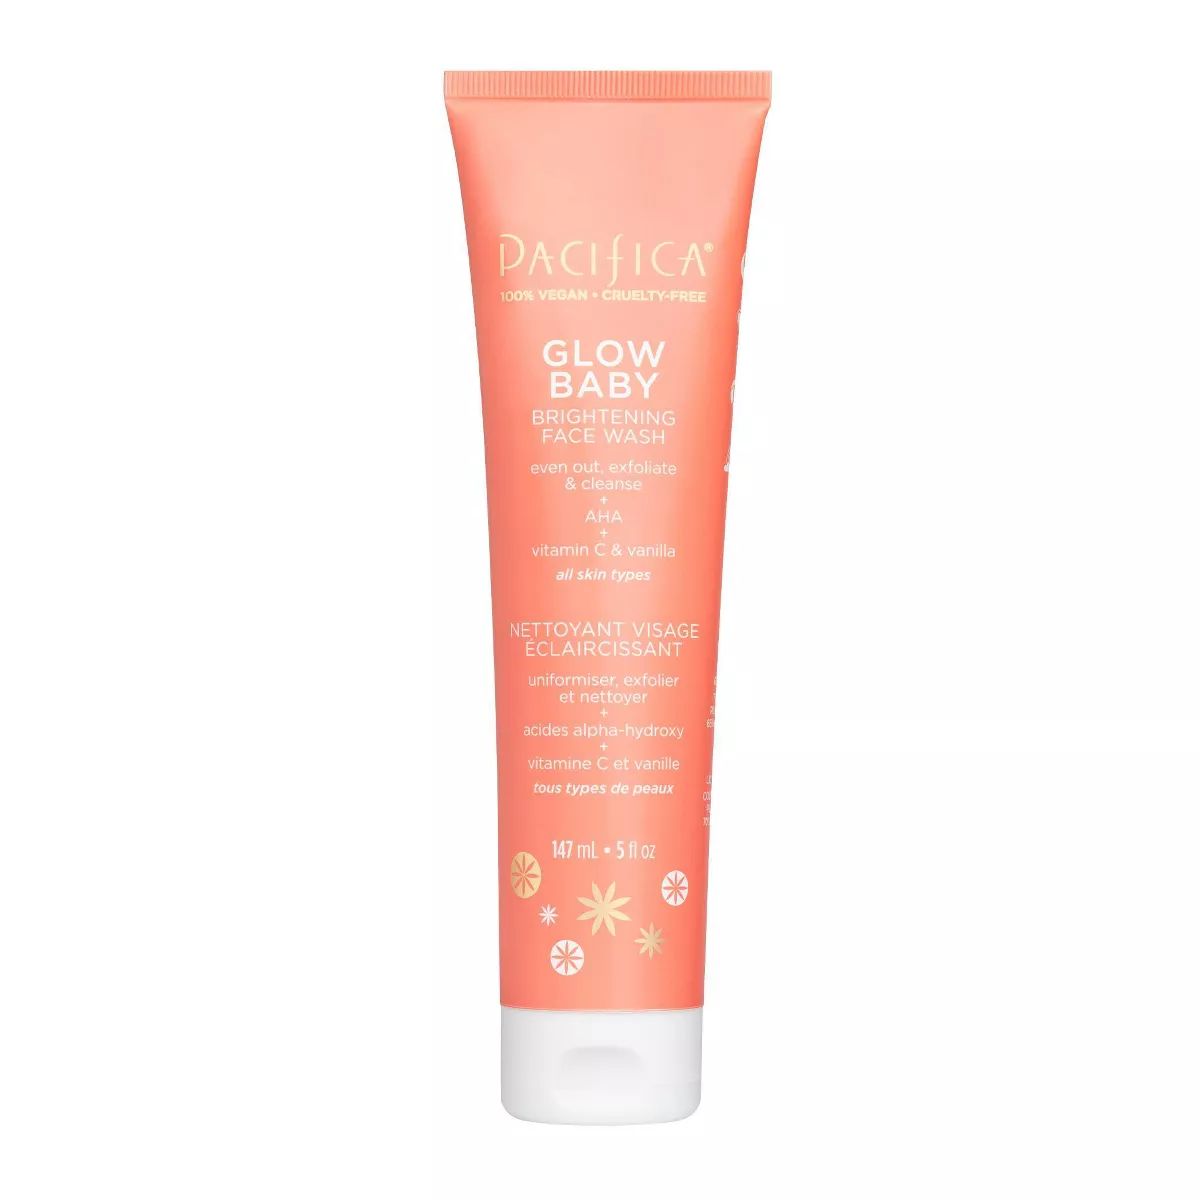 Pacifica Glow Baby Brightening Face Wash | Target